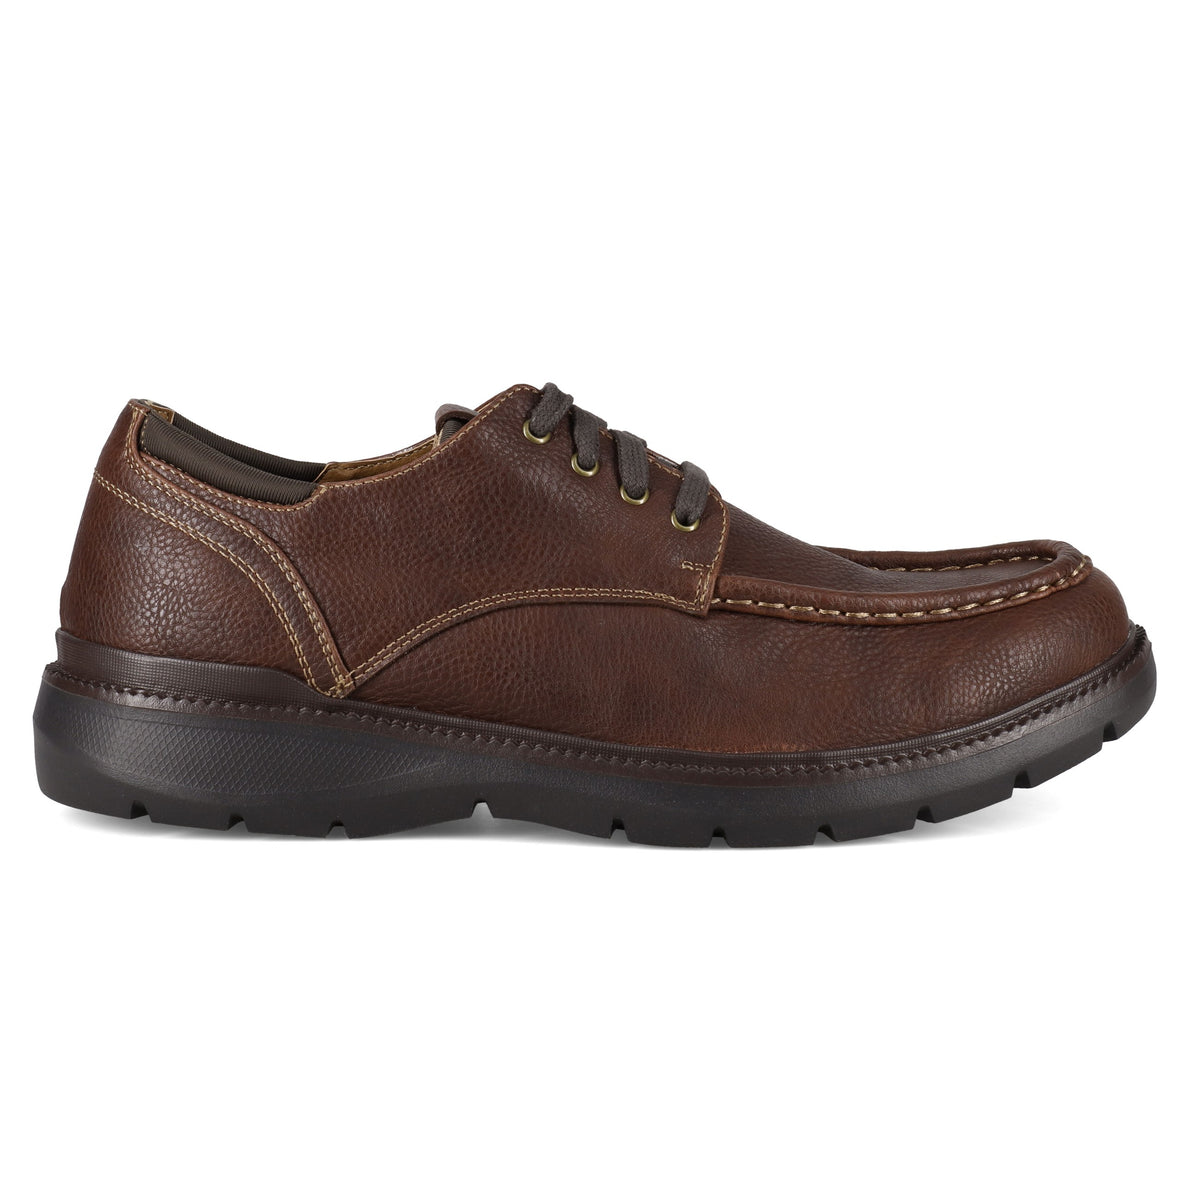 Dockers Shoes Rooney Brown Shoes